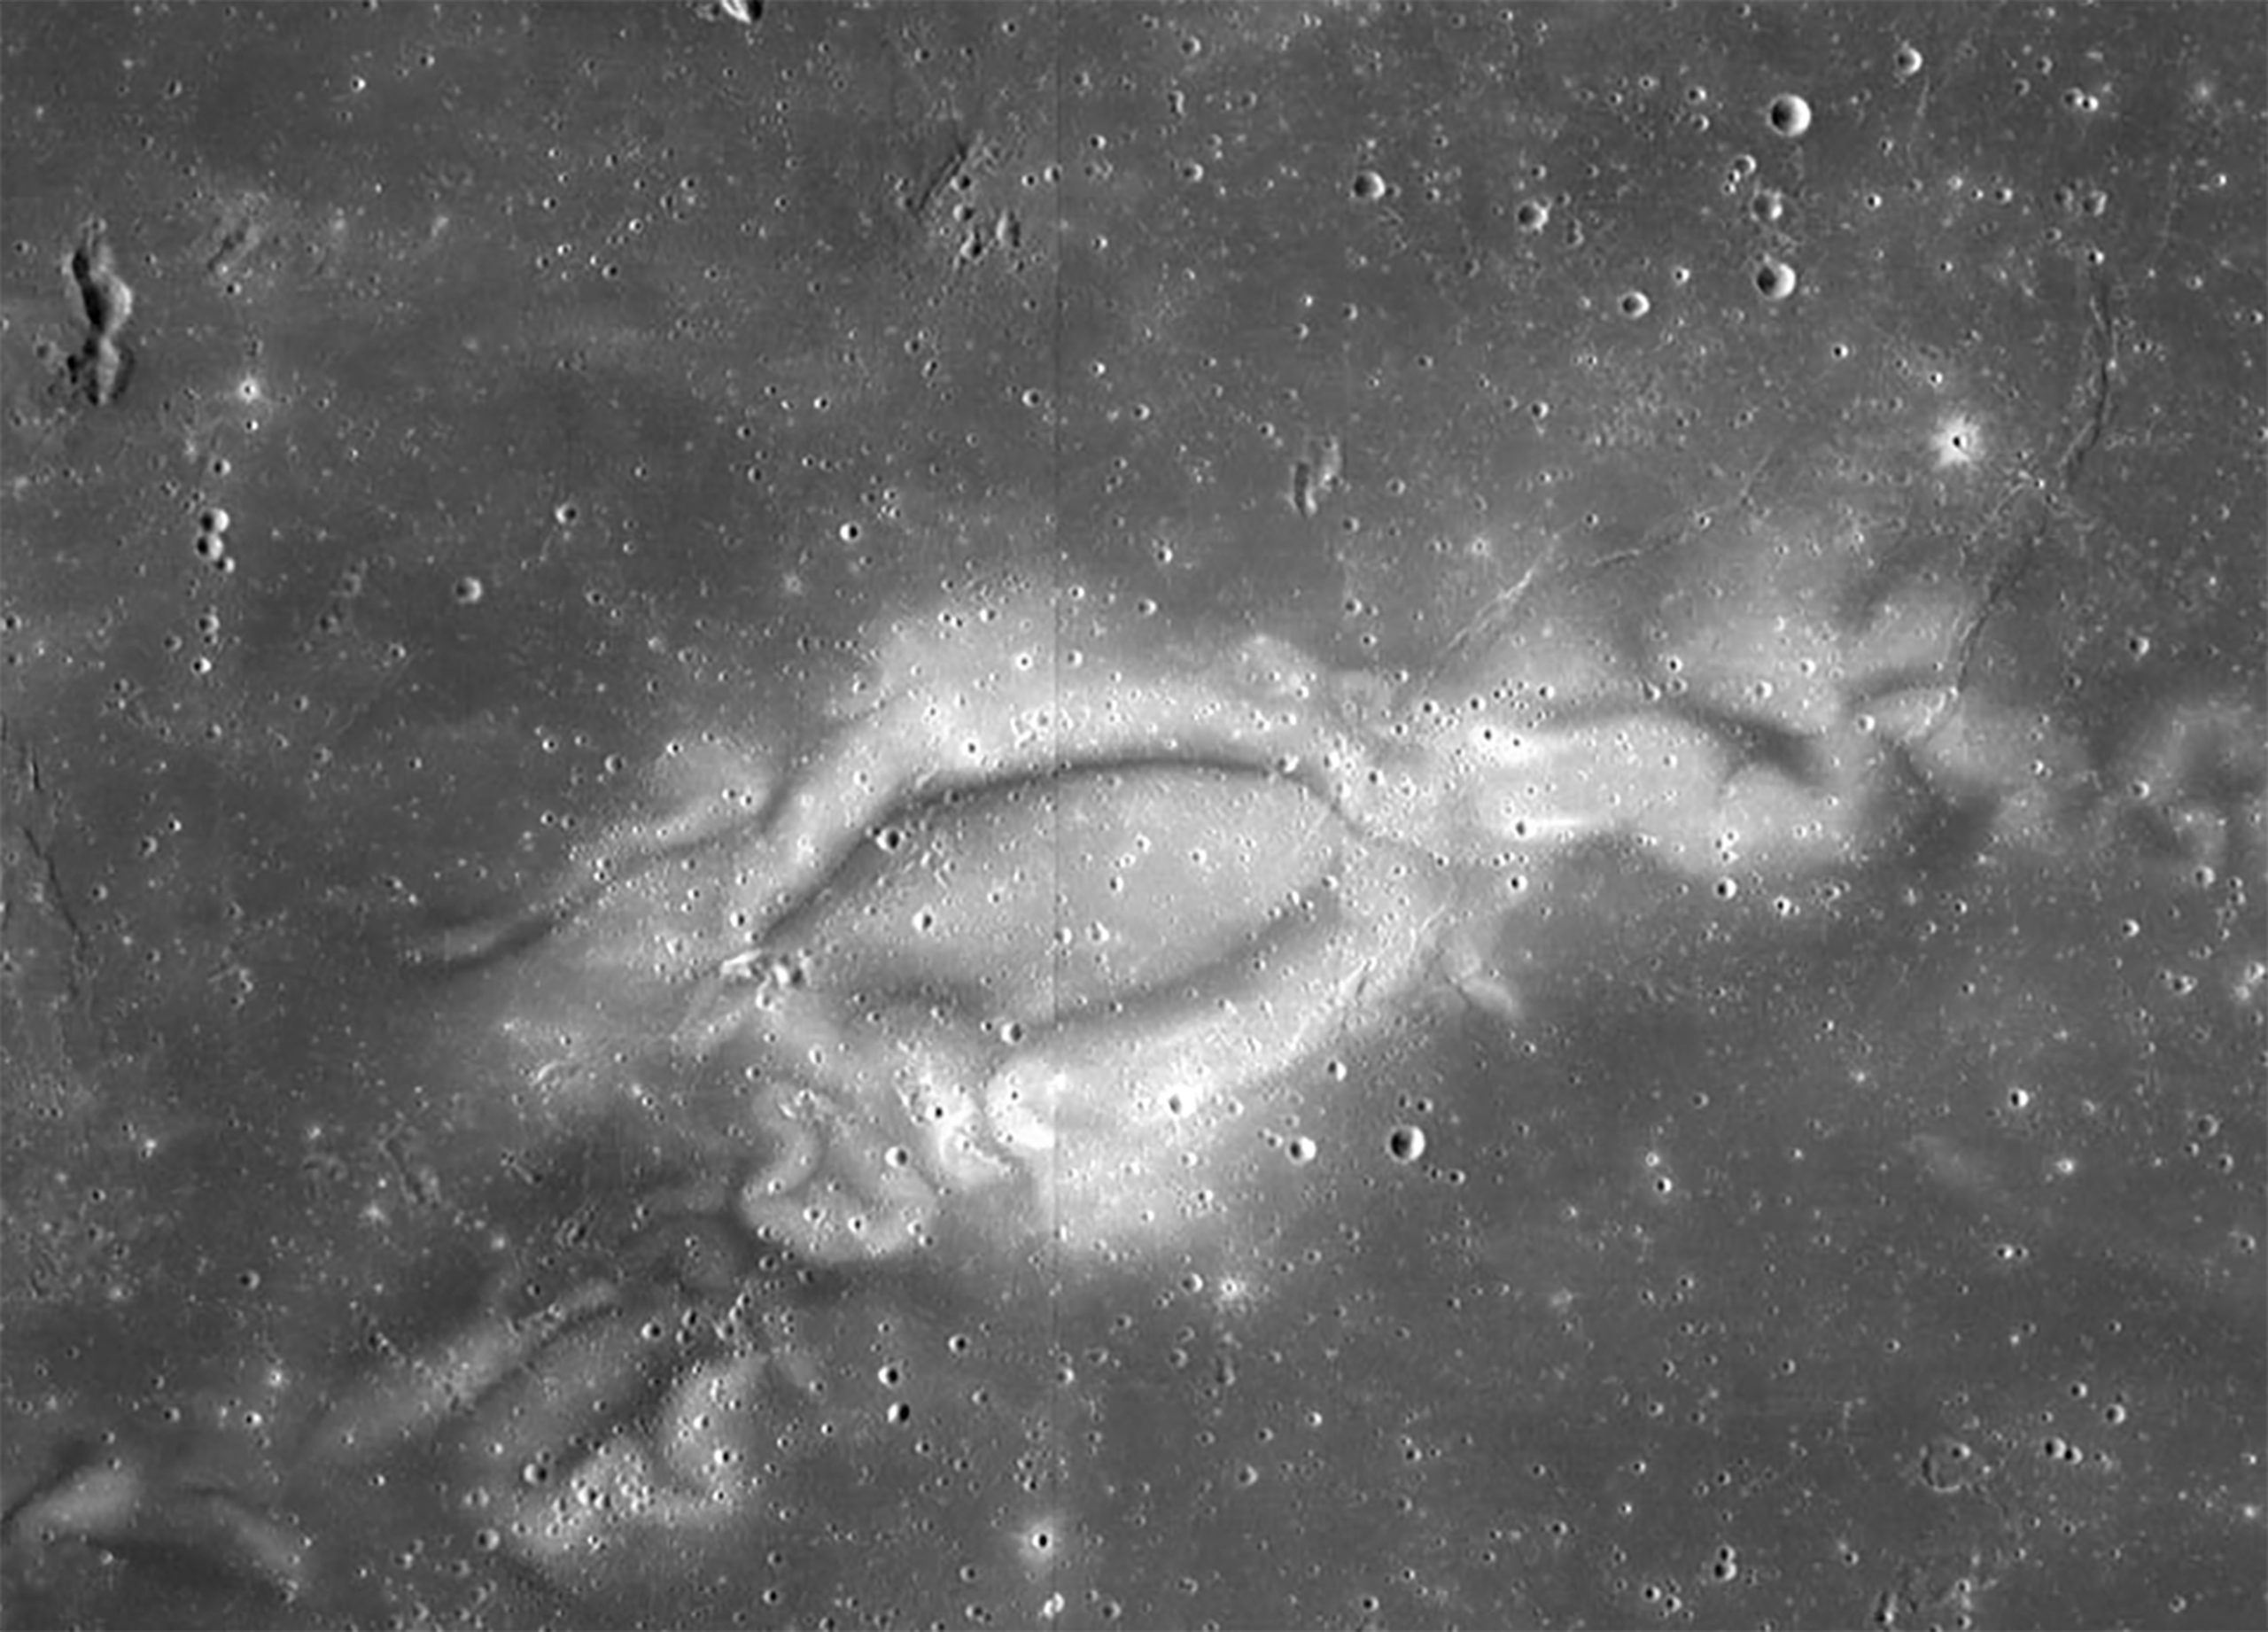 Magnetic vortices on the moon defy science